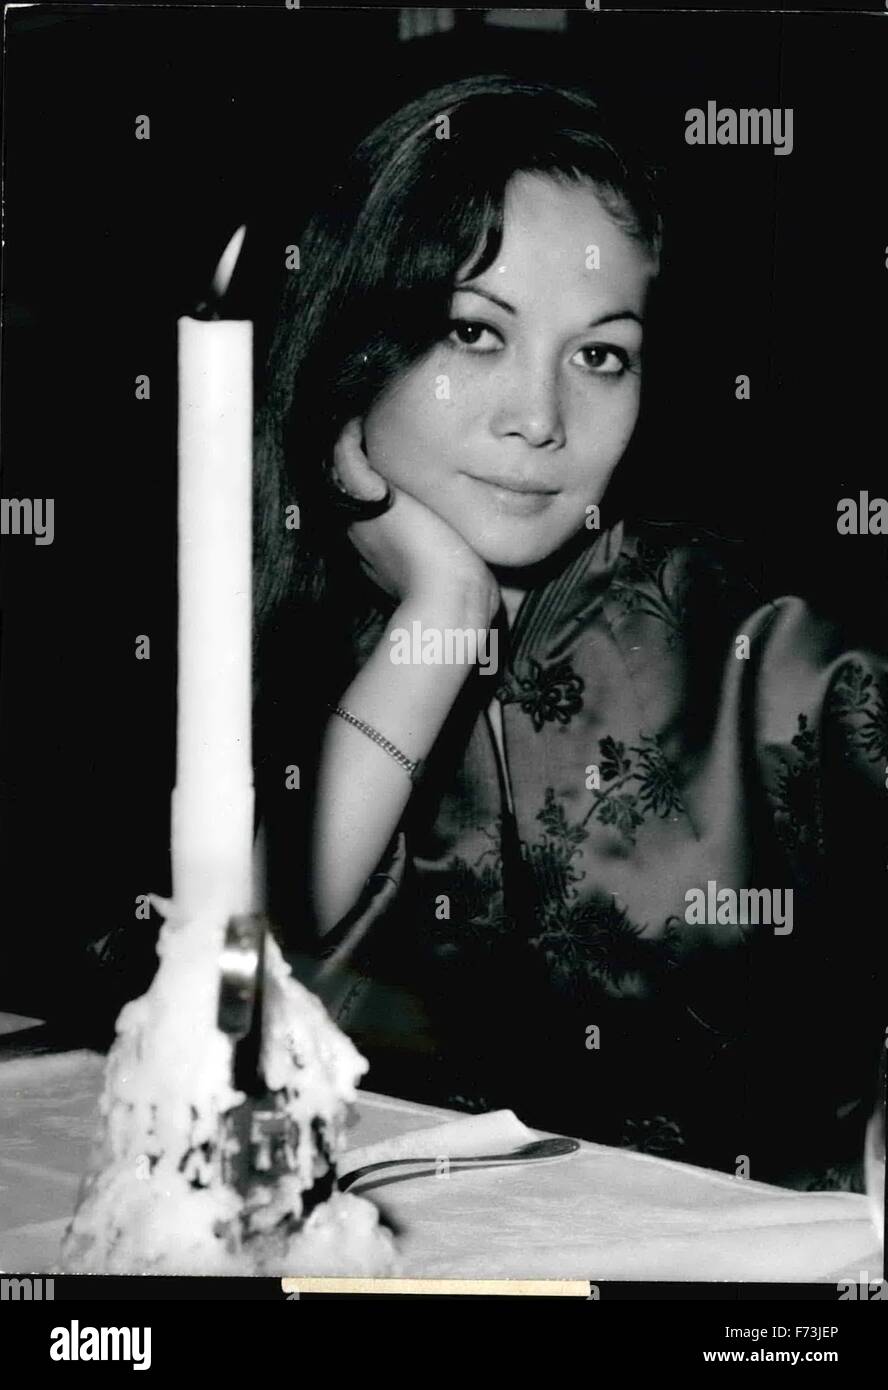 March 14, 1961 - Nancy Kwan see Paris by Night Nancy Kwan, the lovely interpreter of the Ray Stark film The World of Suzie Wong arrived last night in Paris where she will attend to the premiereÃ of the film within some days, took her first dinner last night in the most Parisian Cabaret: the Bada Club OPS: Nancy Kwan pictured last night for her first night in Paris. 140361 © Keystone Pictures USA/ZUMAPRESS.com/Alamy Live News Stock Photo